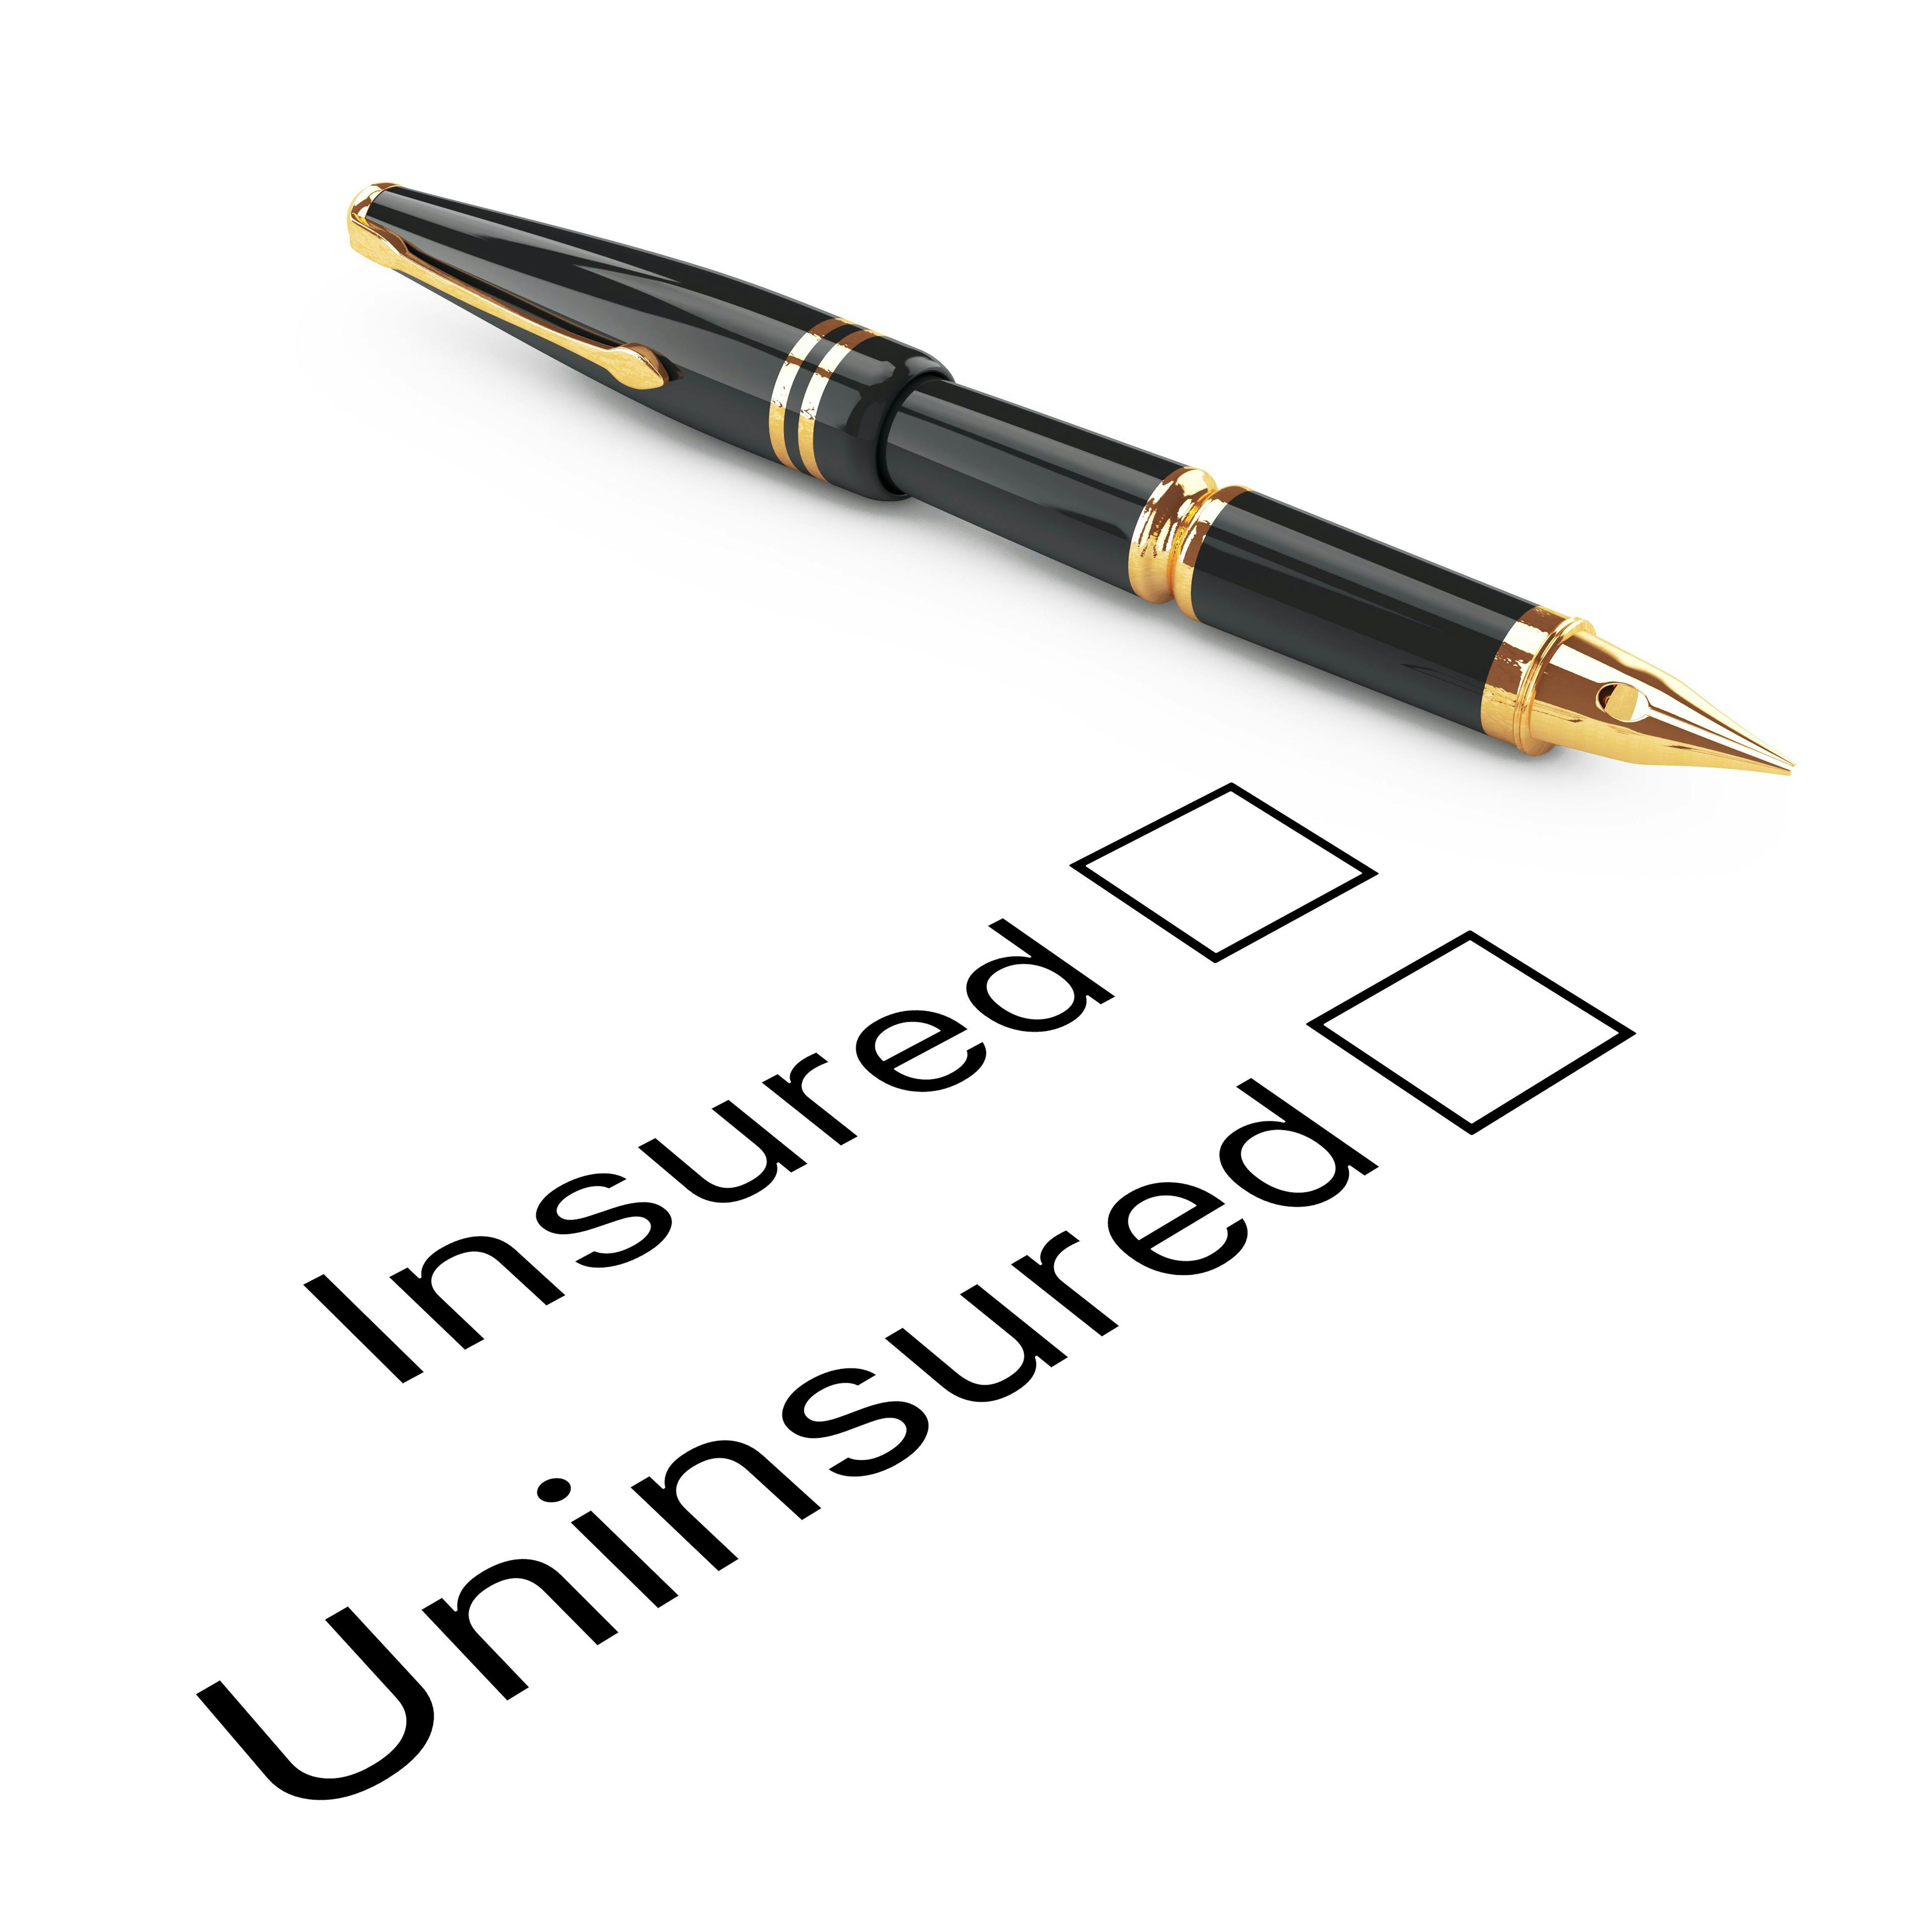 words insured and uninsured with checkboxes | Image credit: doomu  stock.adobe.com